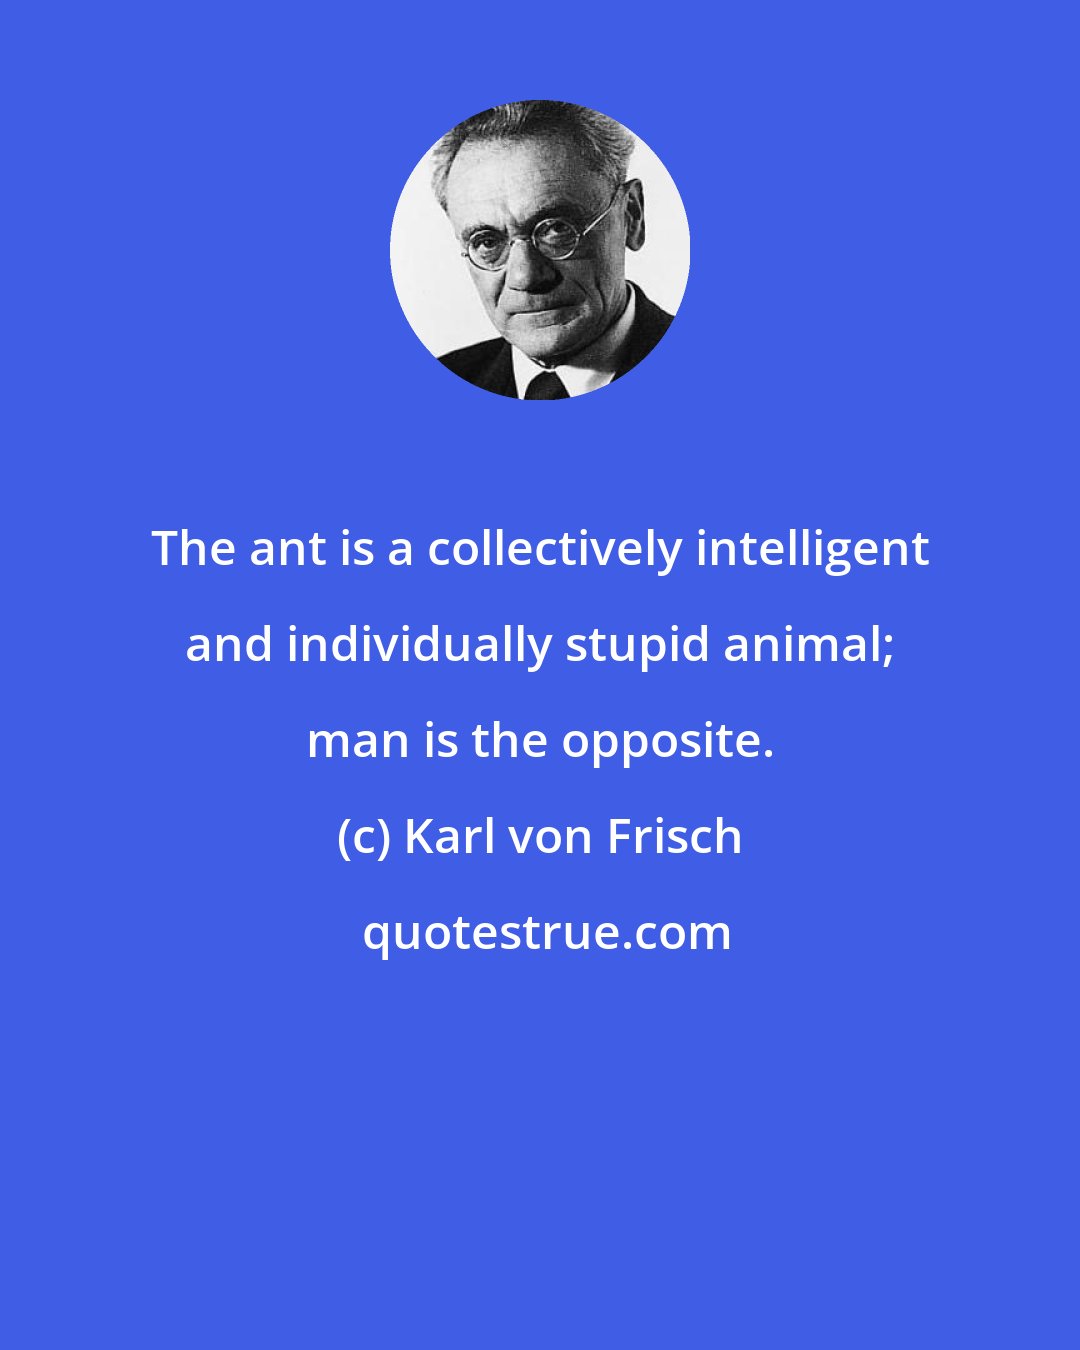 Karl von Frisch: The ant is a collectively intelligent and individually stupid animal; man is the opposite.